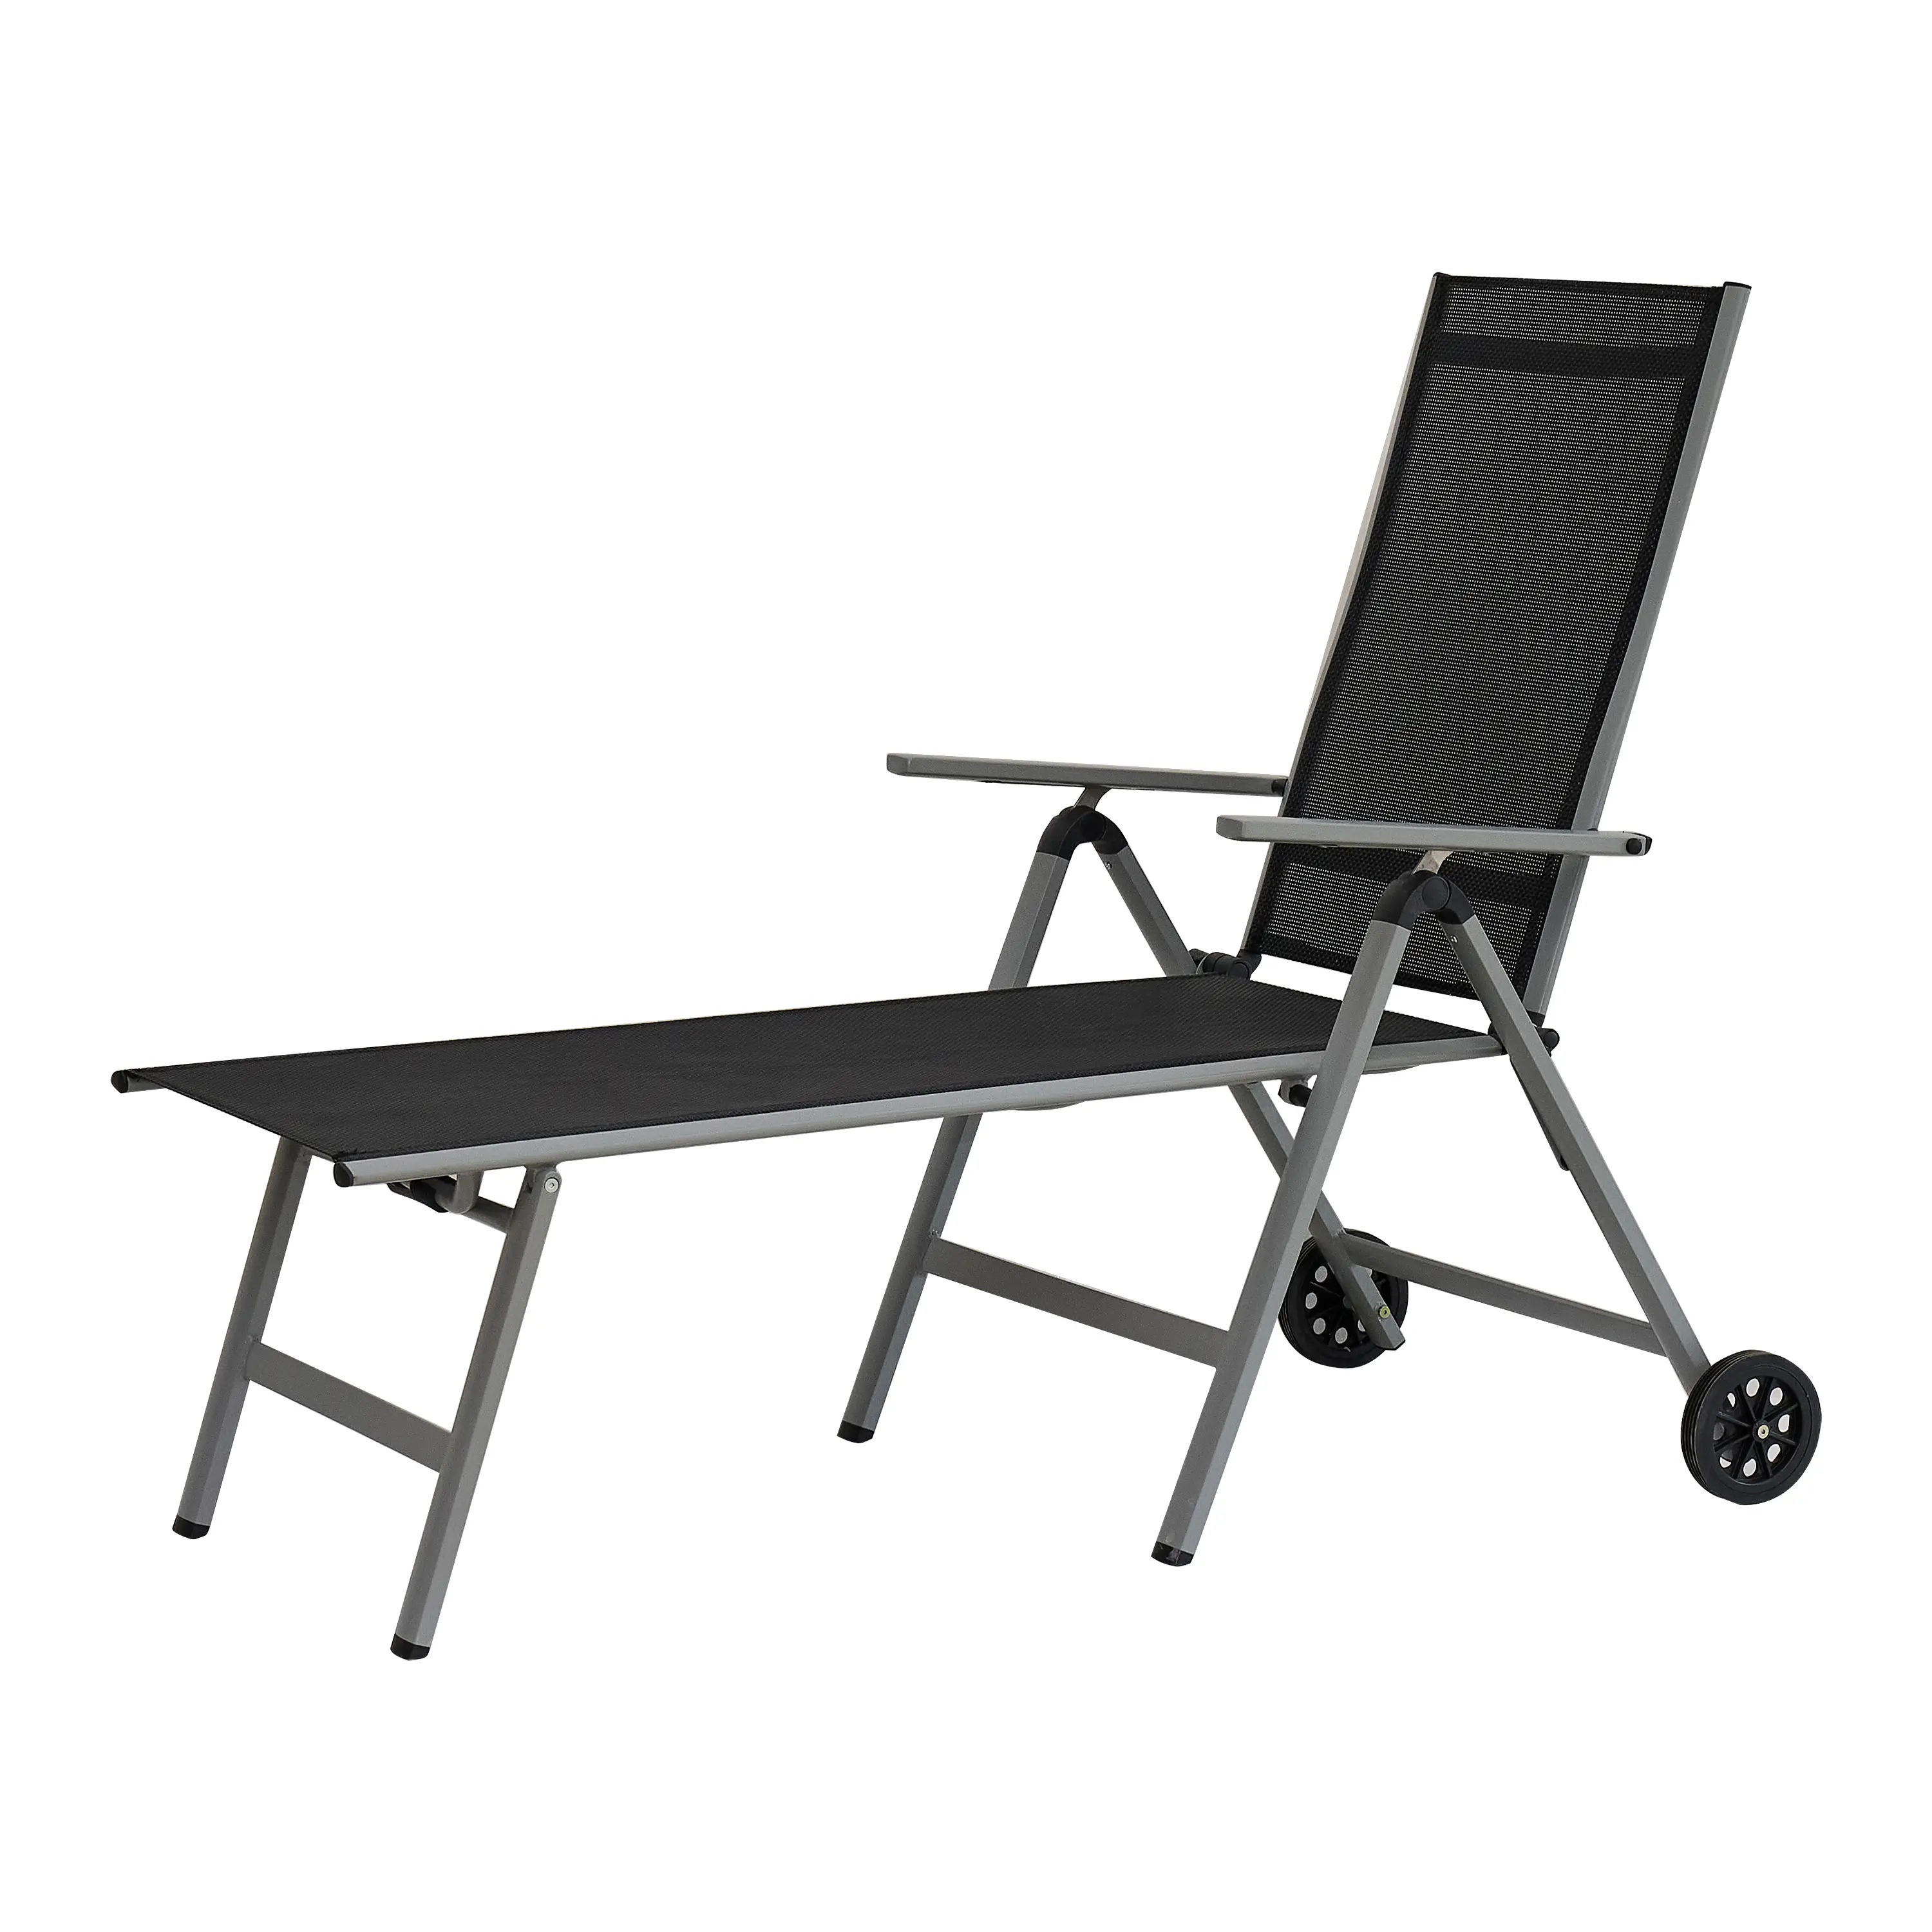 Outdoor Aluminum Adjustable Chair Chaise Lounge Chairs with Wheels for Patio